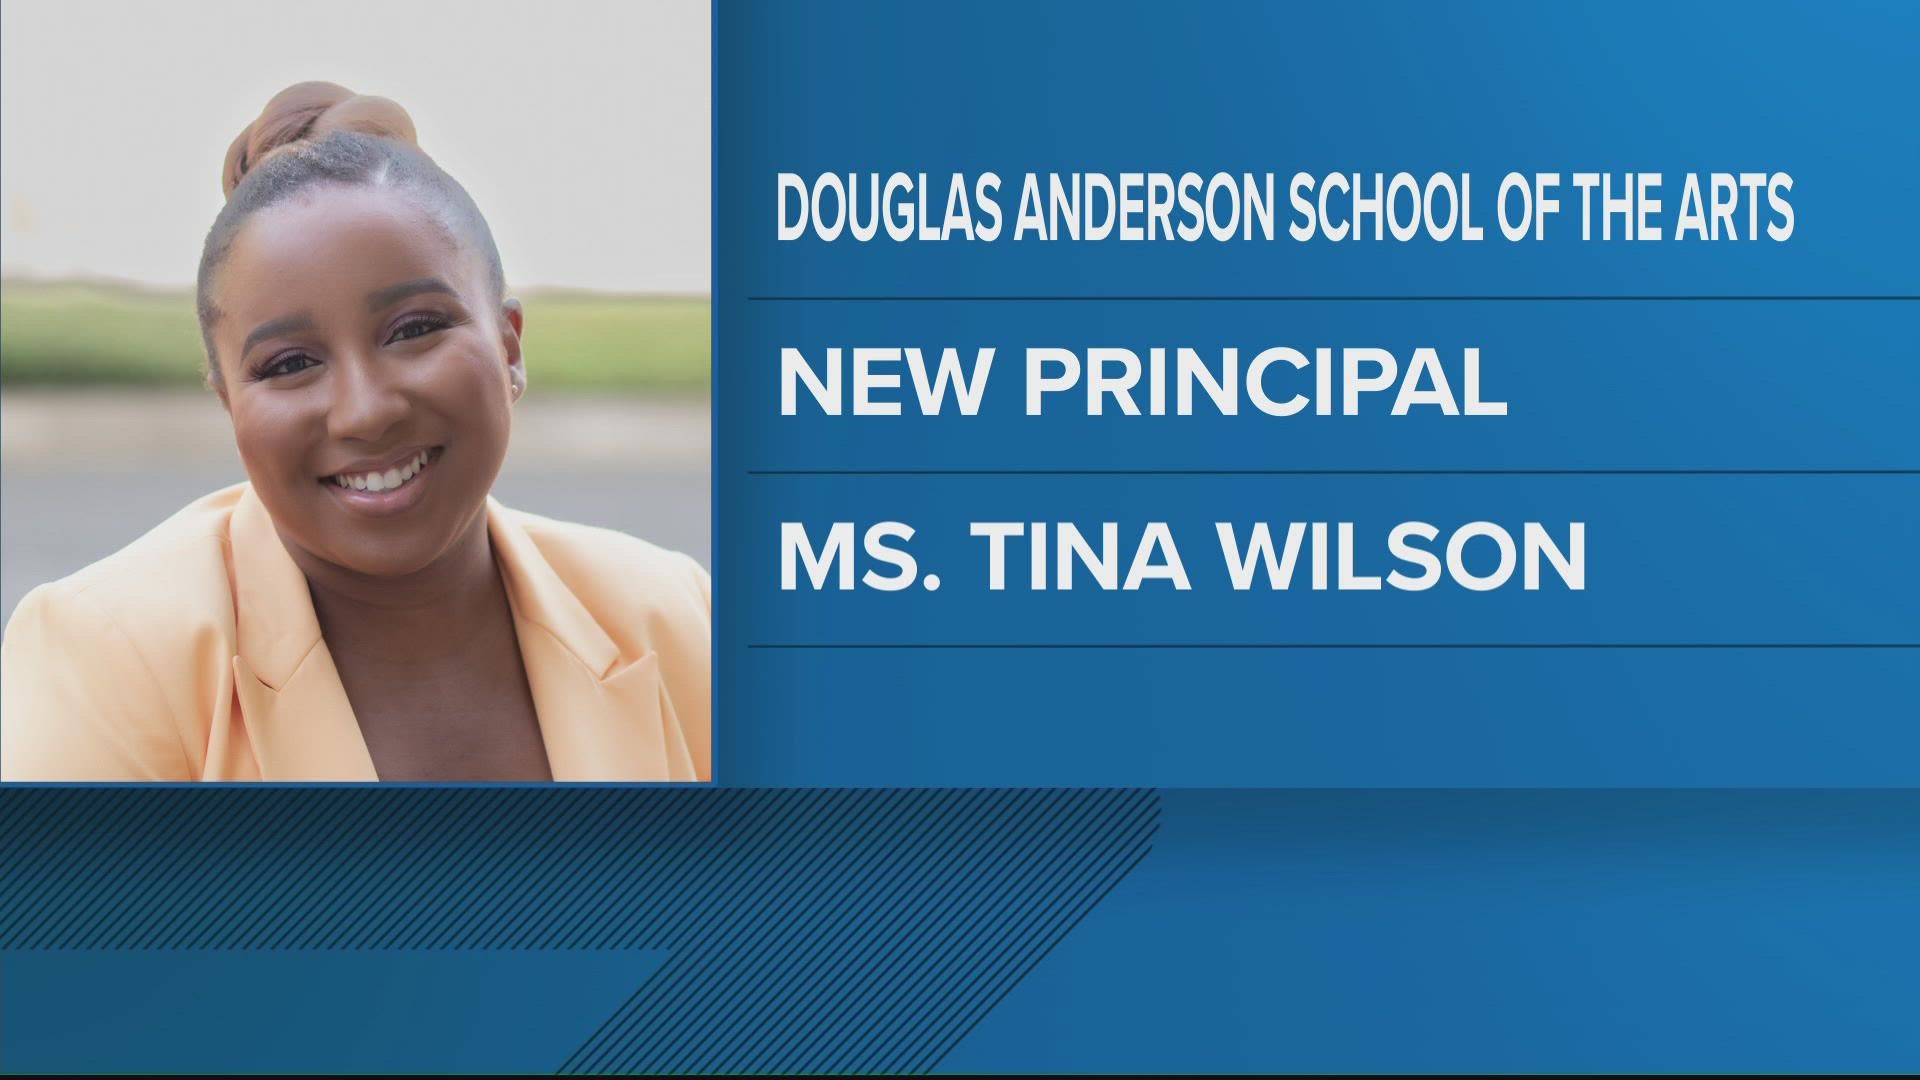 She was serving as the interim Principal during a national search.